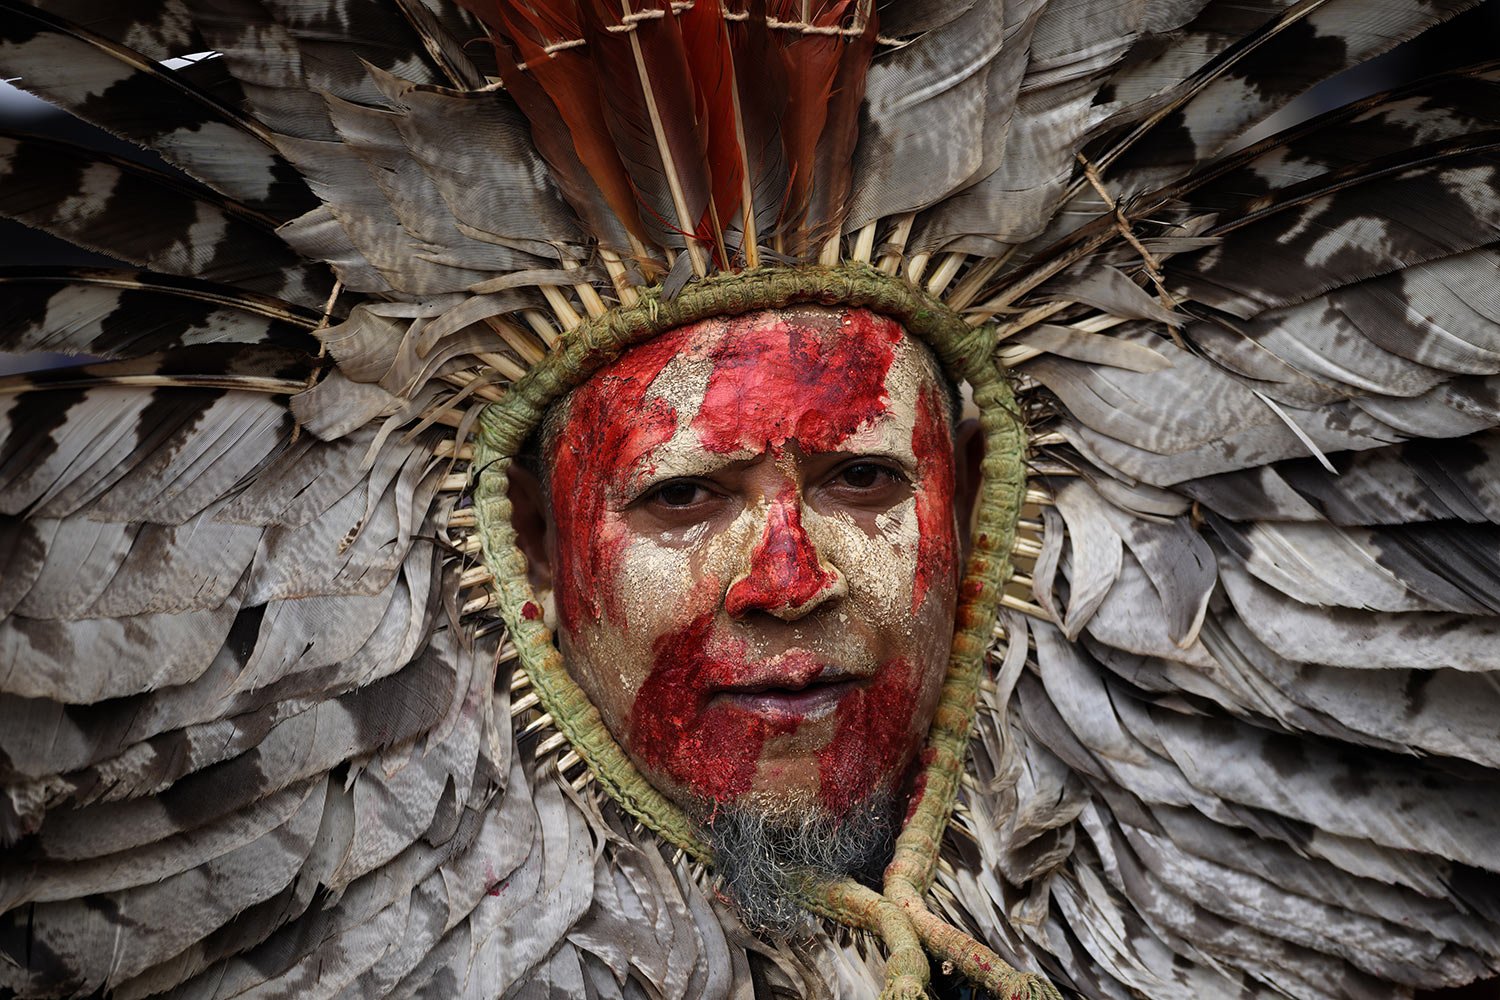  An Indigenous man, his face painted with red ink representing spilled Indigenous blood and clay representing gold, protests the increase of mining activities that are encroaching on his land, outside the Mines and Energy Ministry in Brasilia, Brazil